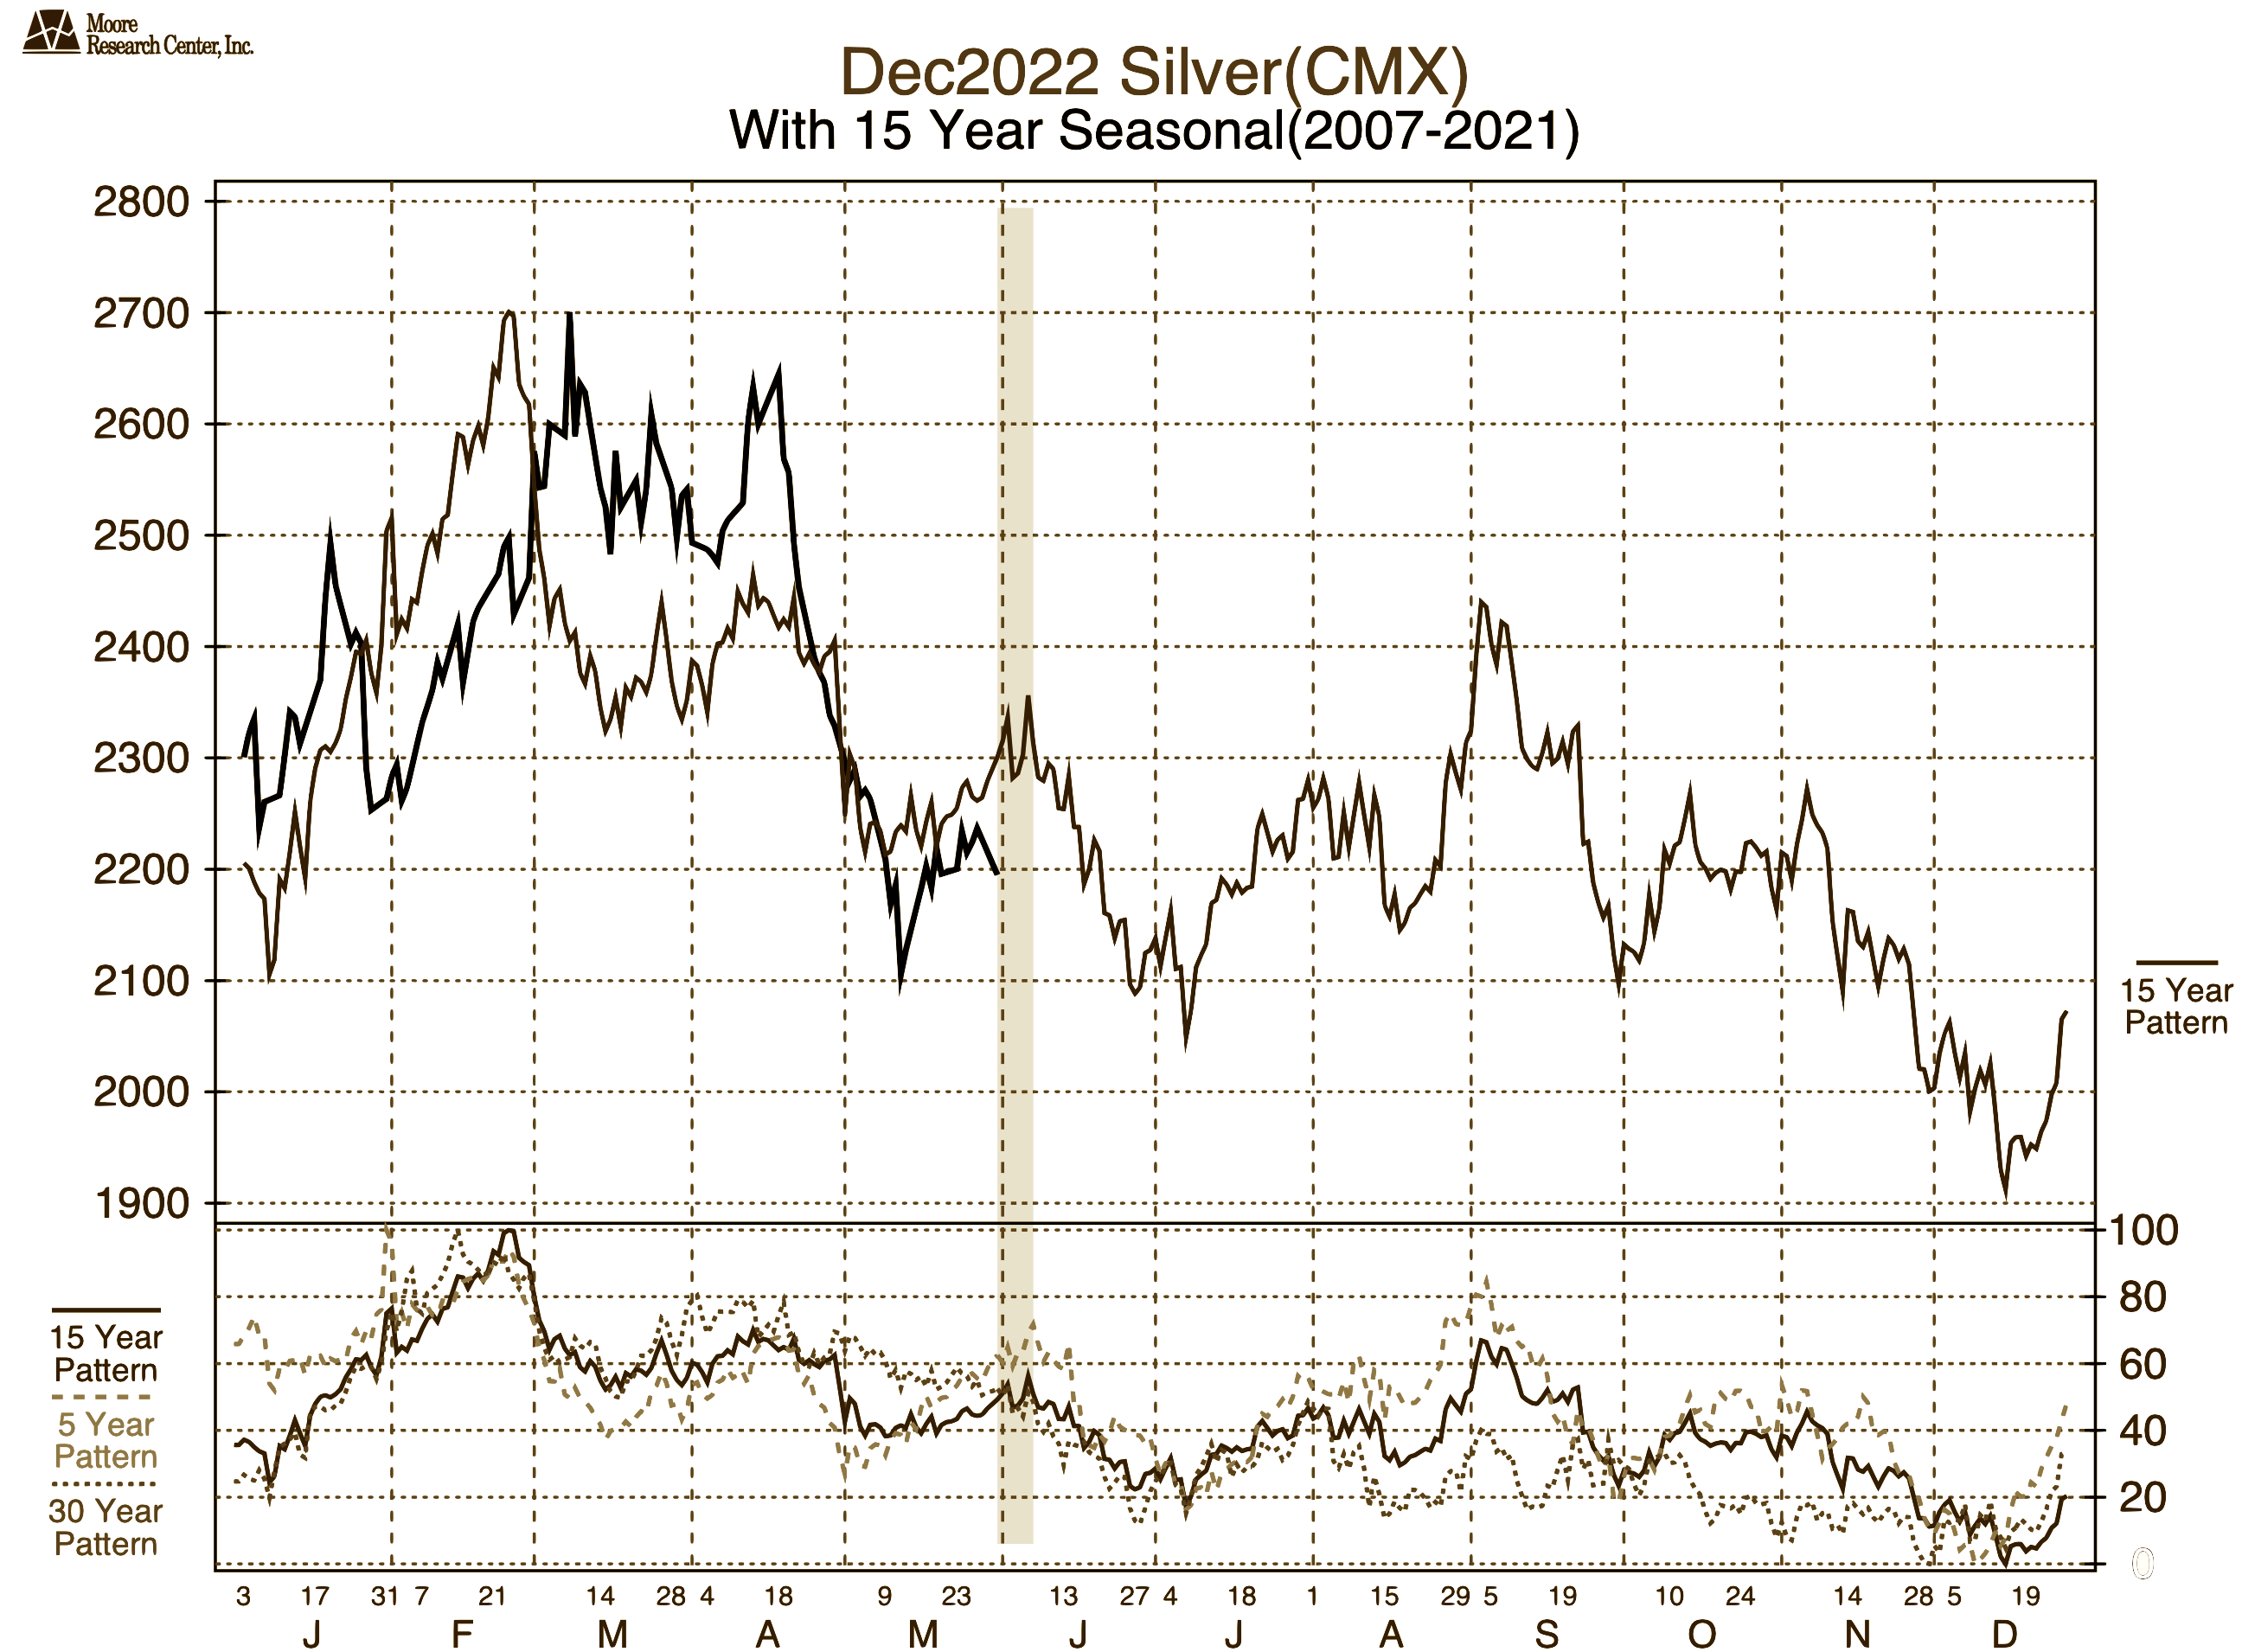 overlay line chart showing seasonal trading patterns for silver